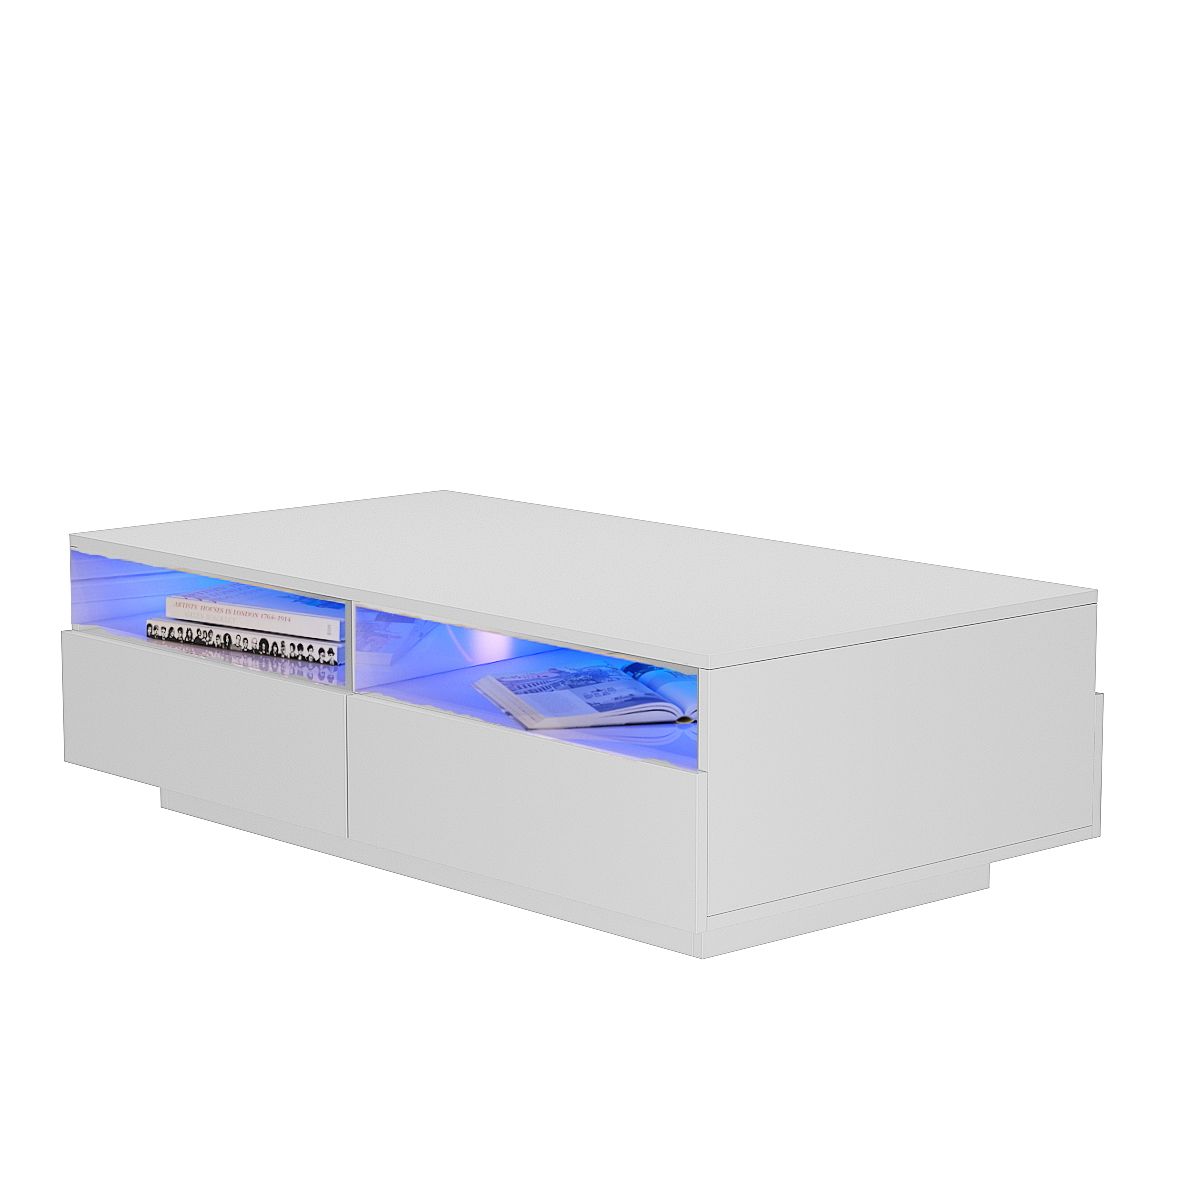 Modern High Gloss White Led Light Coffee Table W/4 Drawers Living Room Inside Led Coffee Tables With 4 Drawers (View 8 of 20)